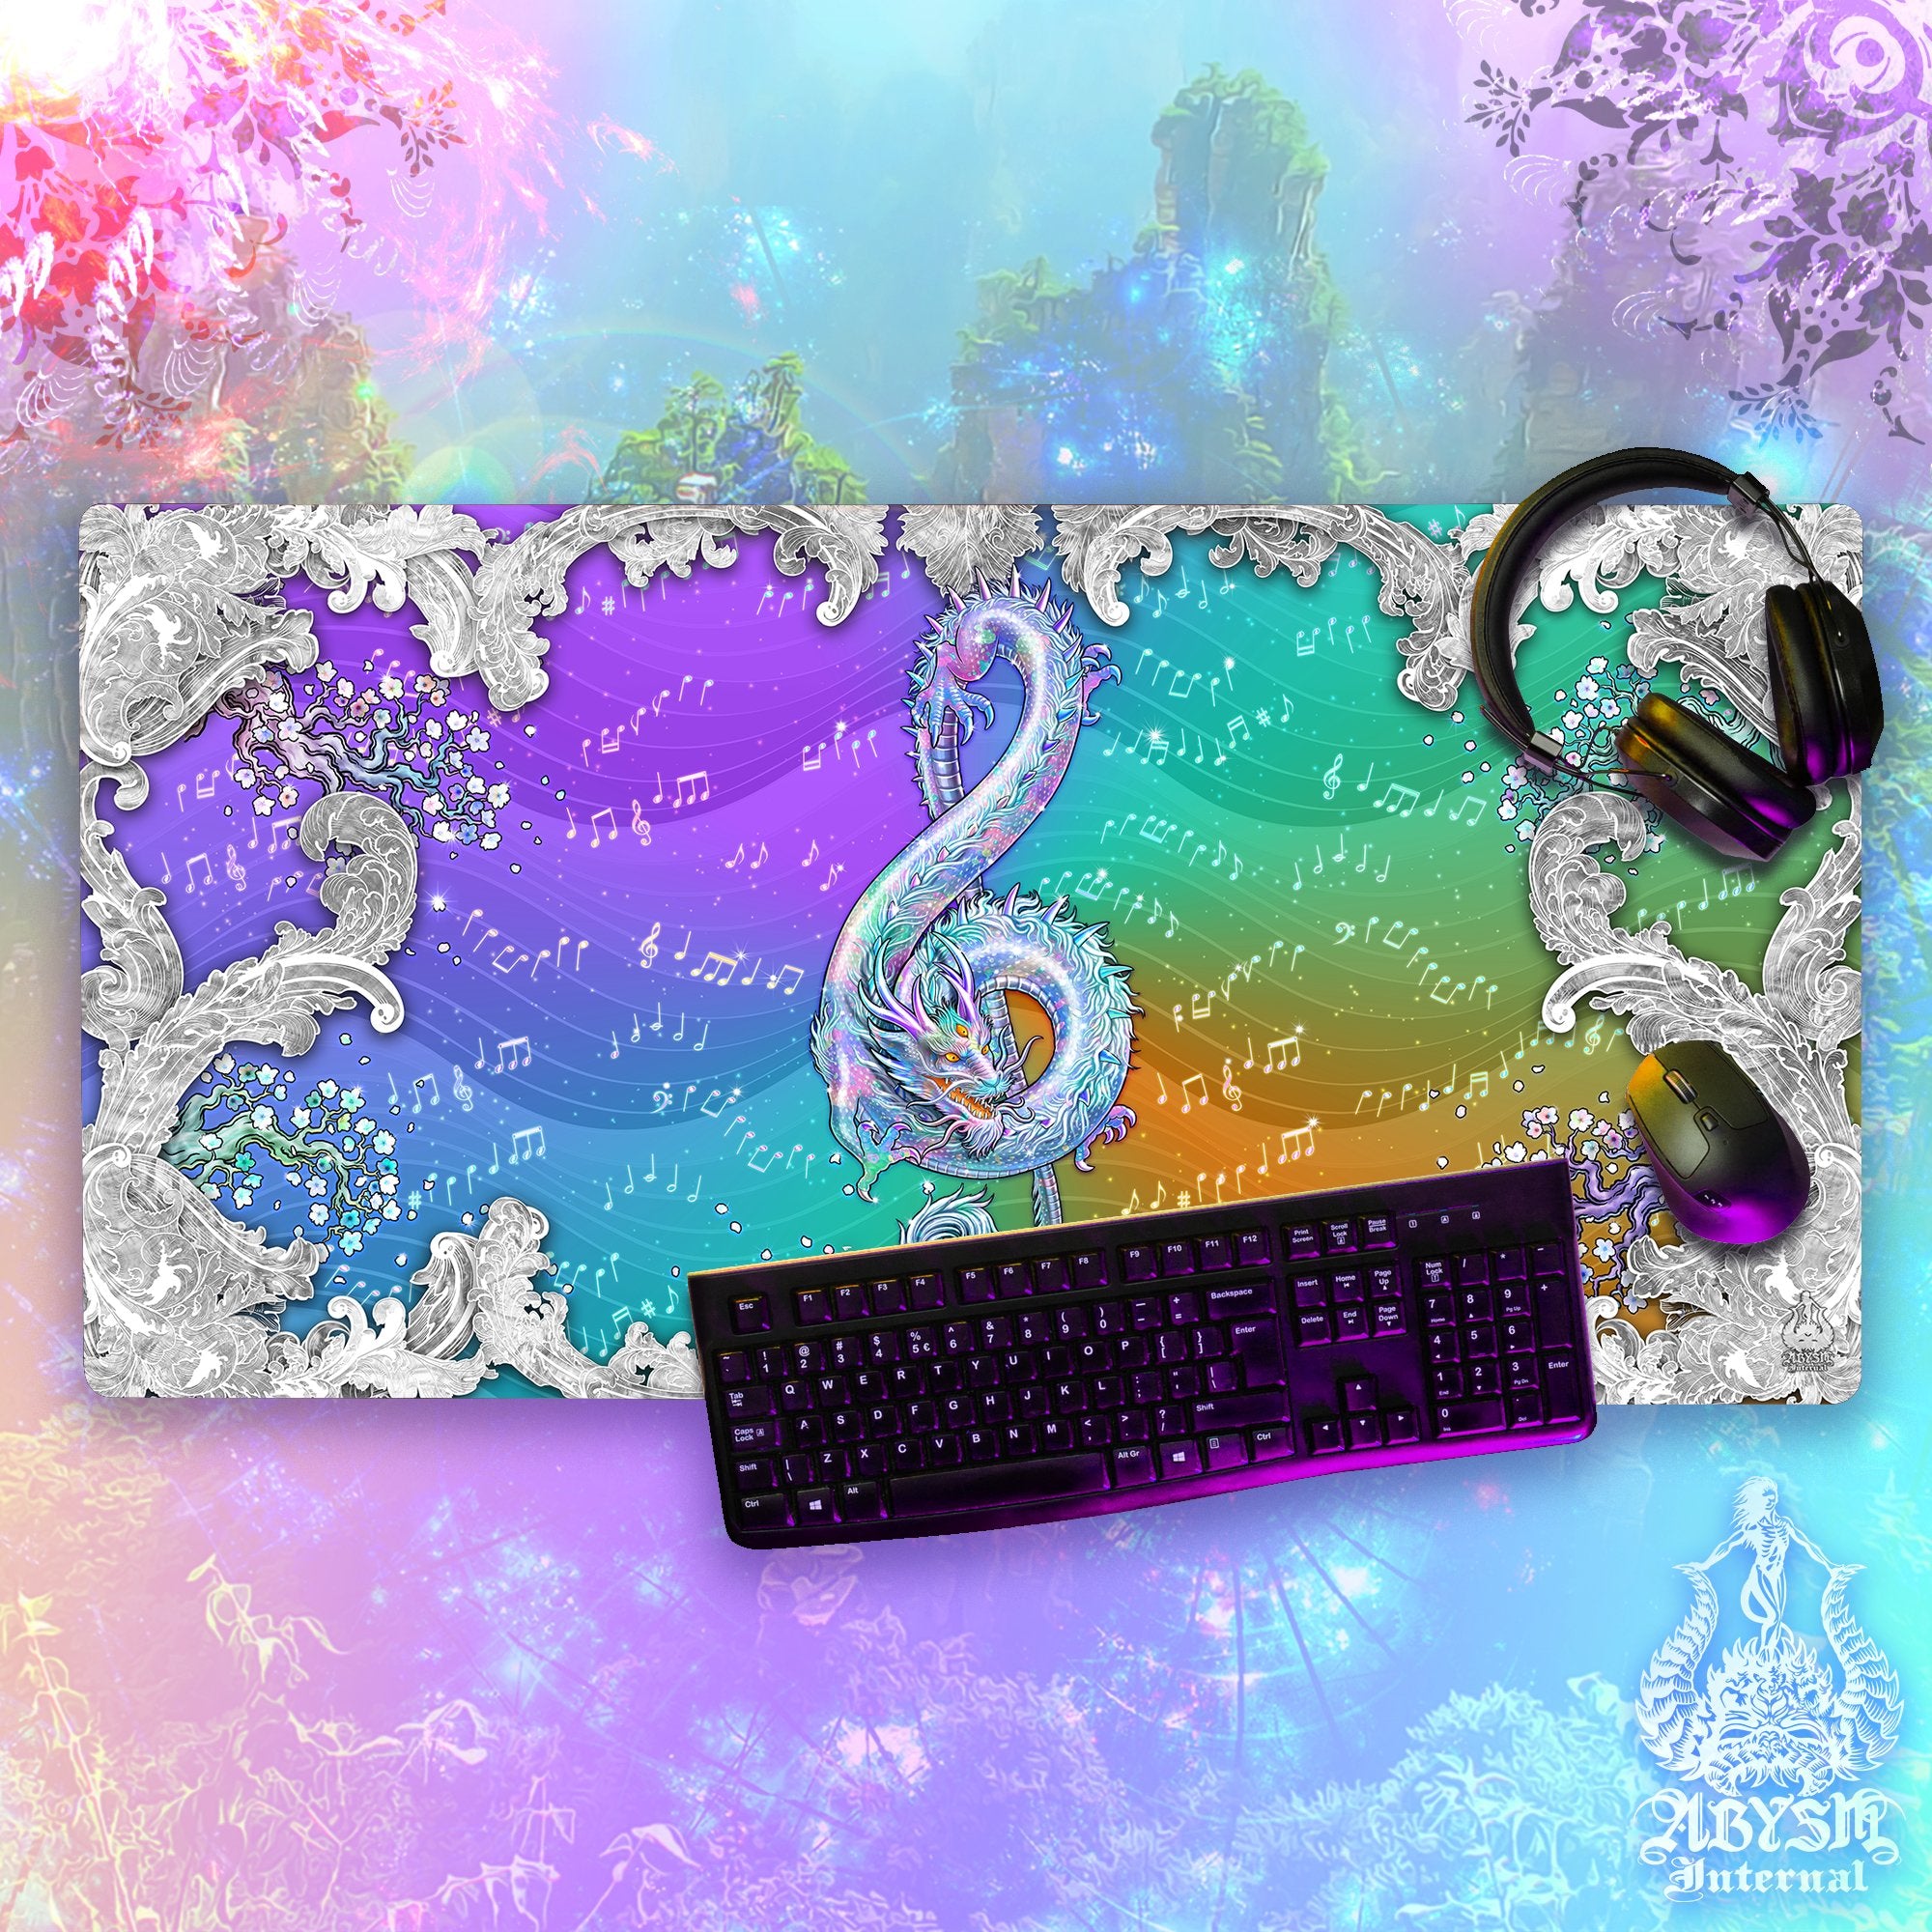 Dragon Workpad, Music Desk Mat, Asian Gaming Mouse Pad, Indie Gemstone Table Protector Cover, Treble Clef Art Print - 8 Color Options - Abysm Internal